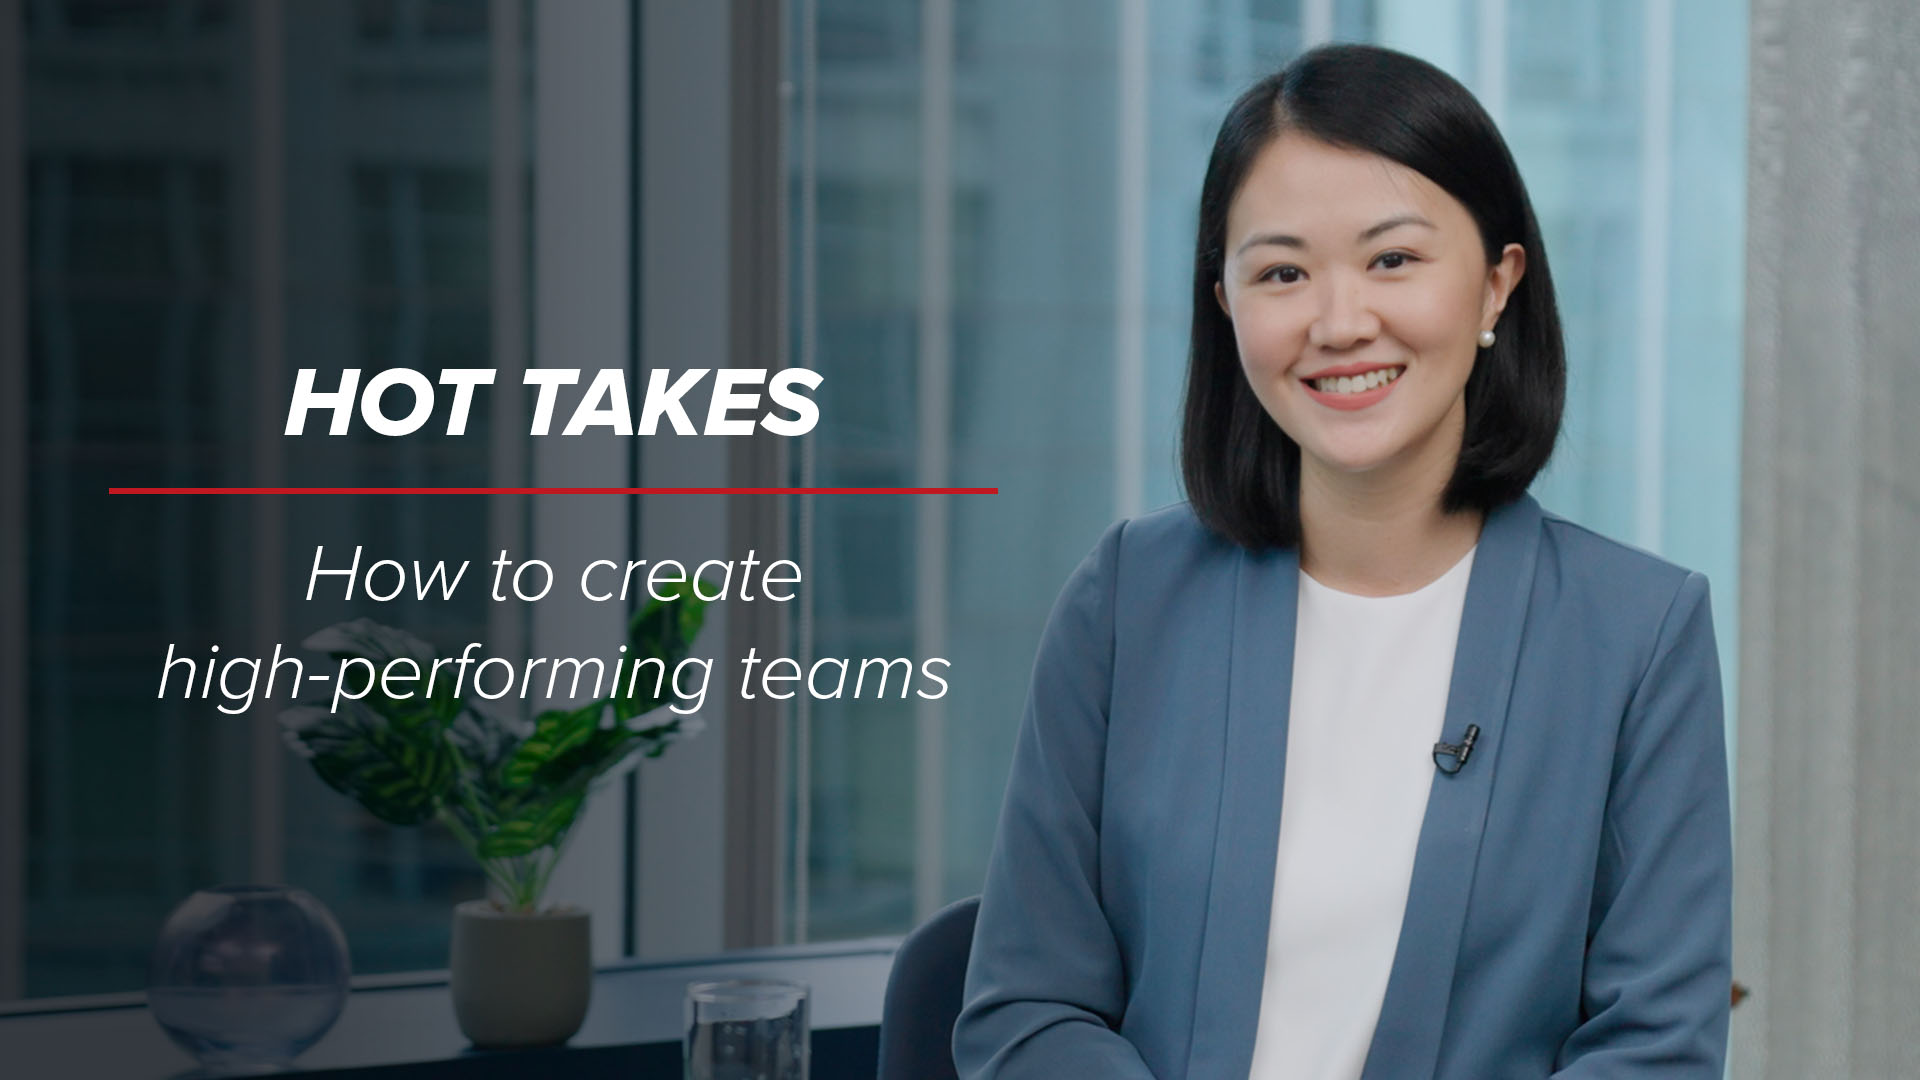 5 most common barriers to creating the best teams and how to overcome them